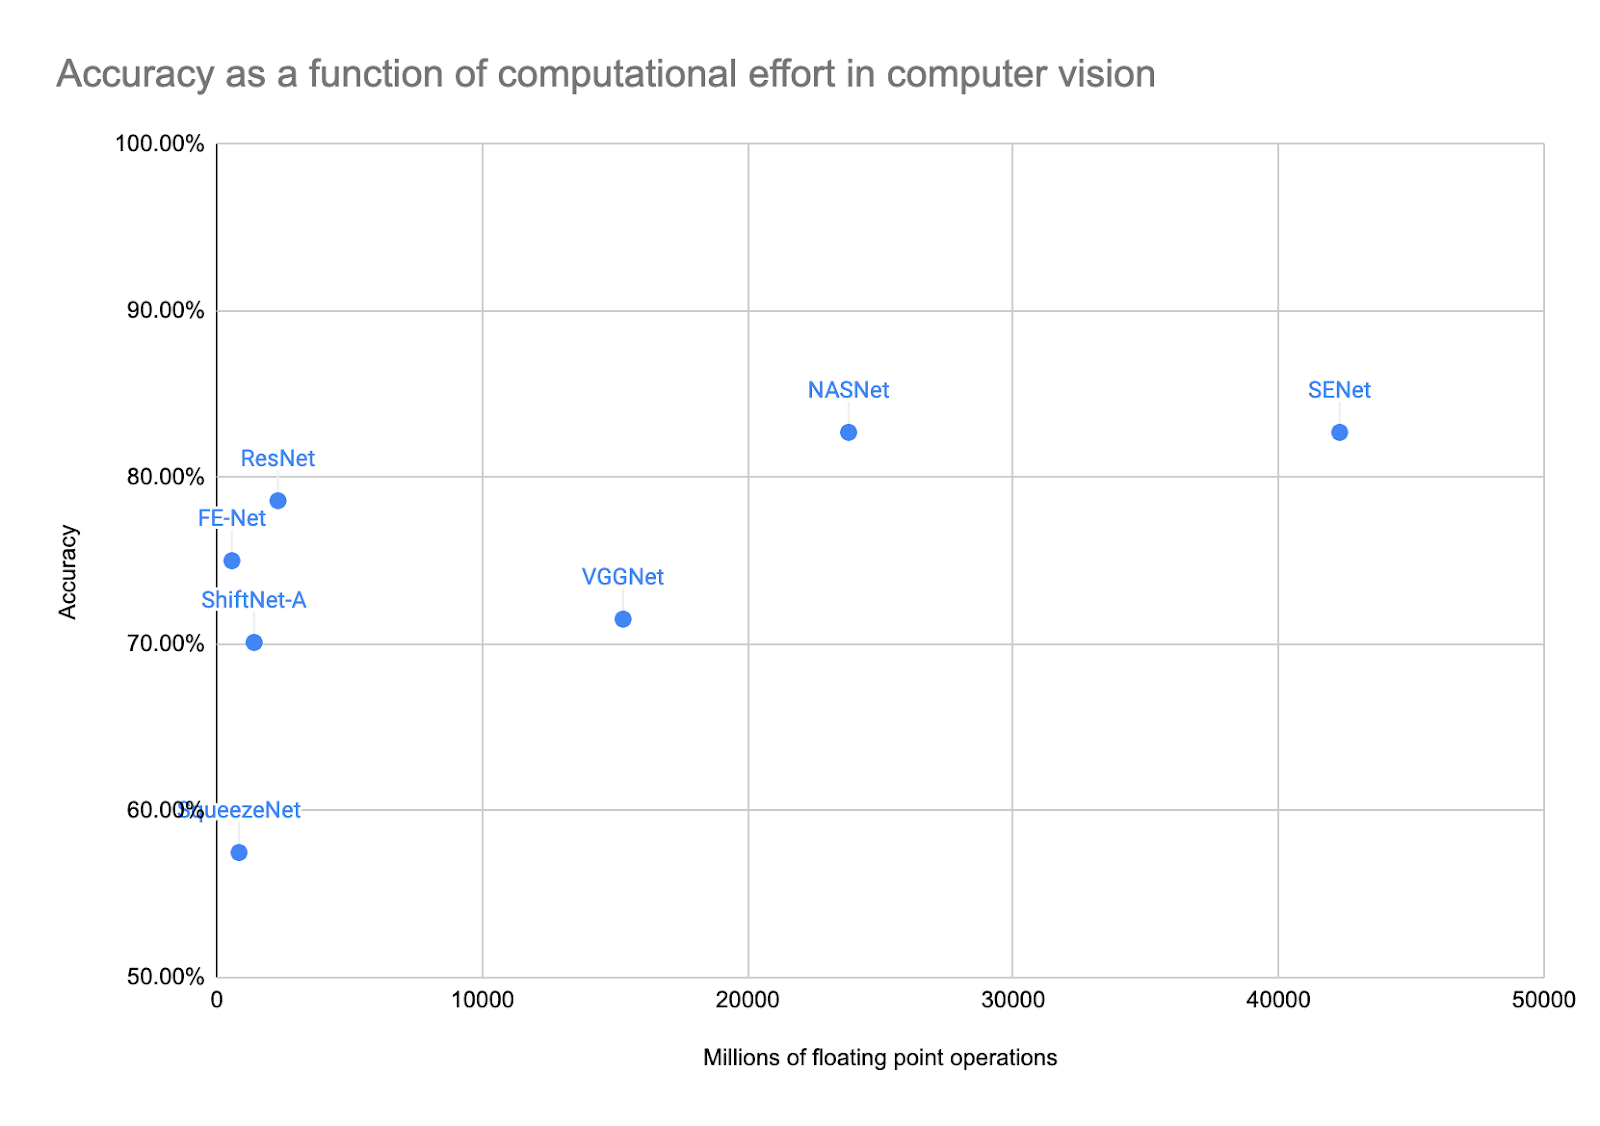 accuracy as a function of computation effort